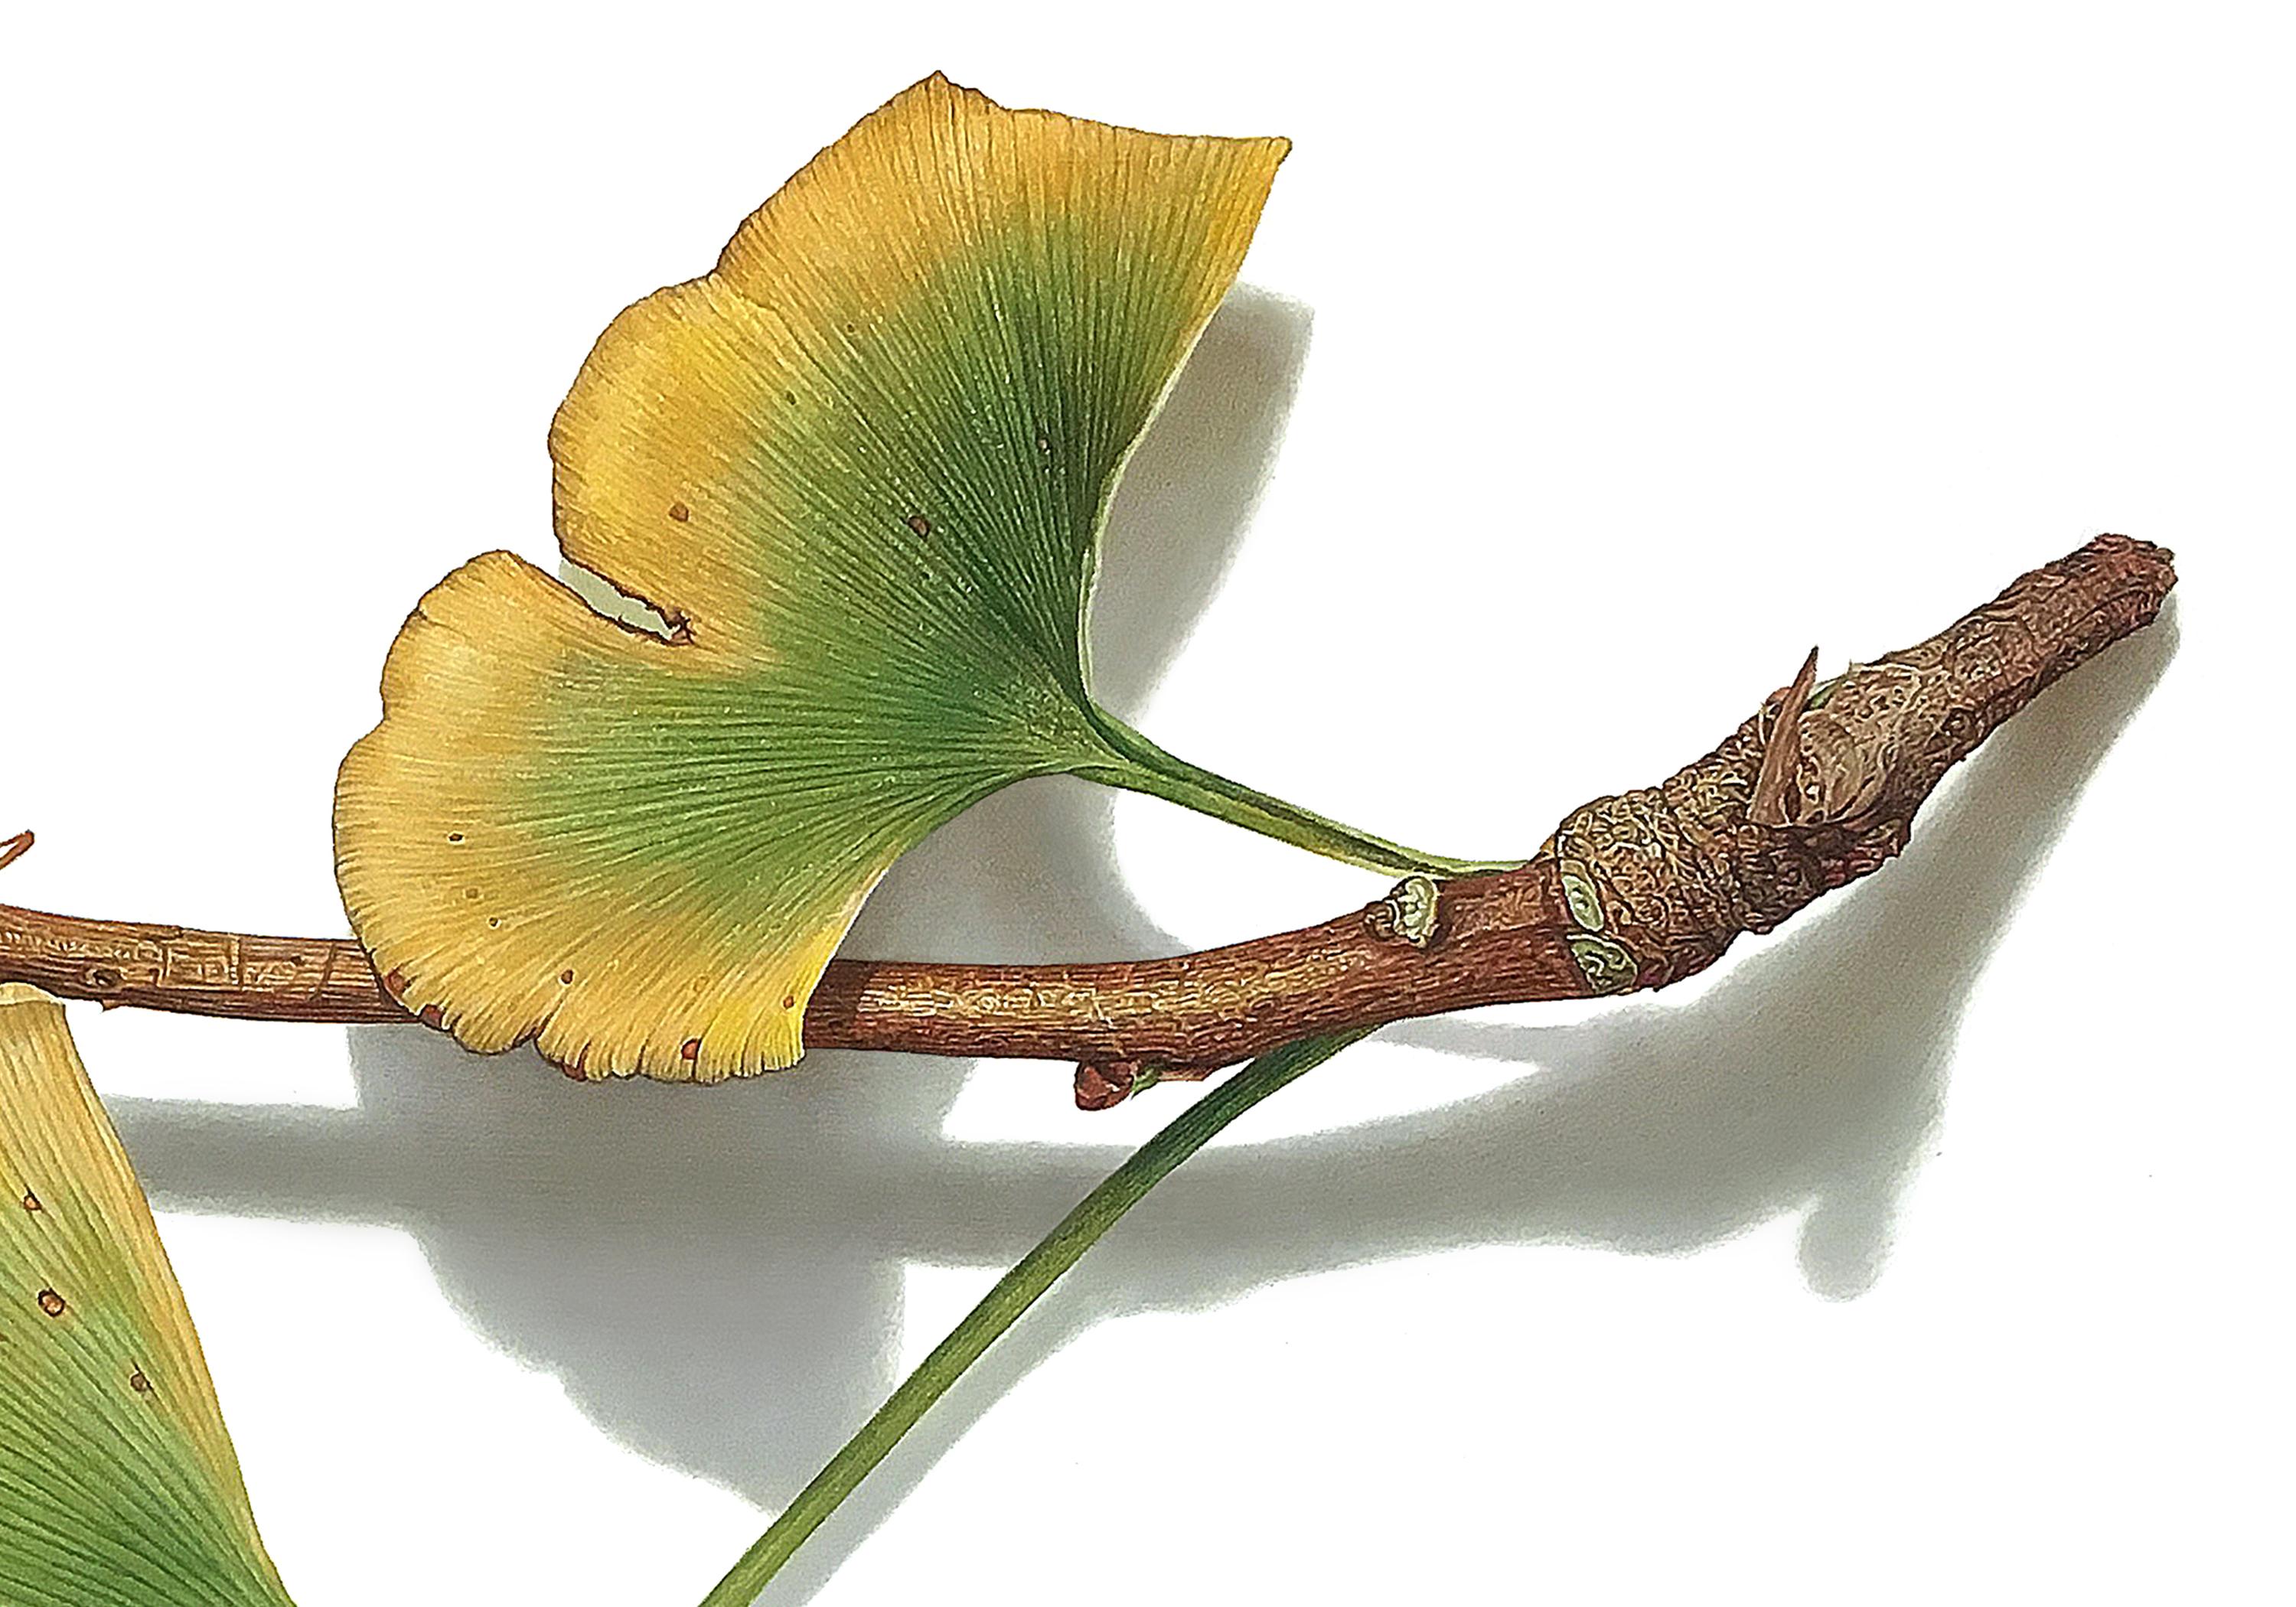 Gingko No.4, 2023, hyper-realist drawing, colored pencil on paper  - American Realist Art by David Morrison